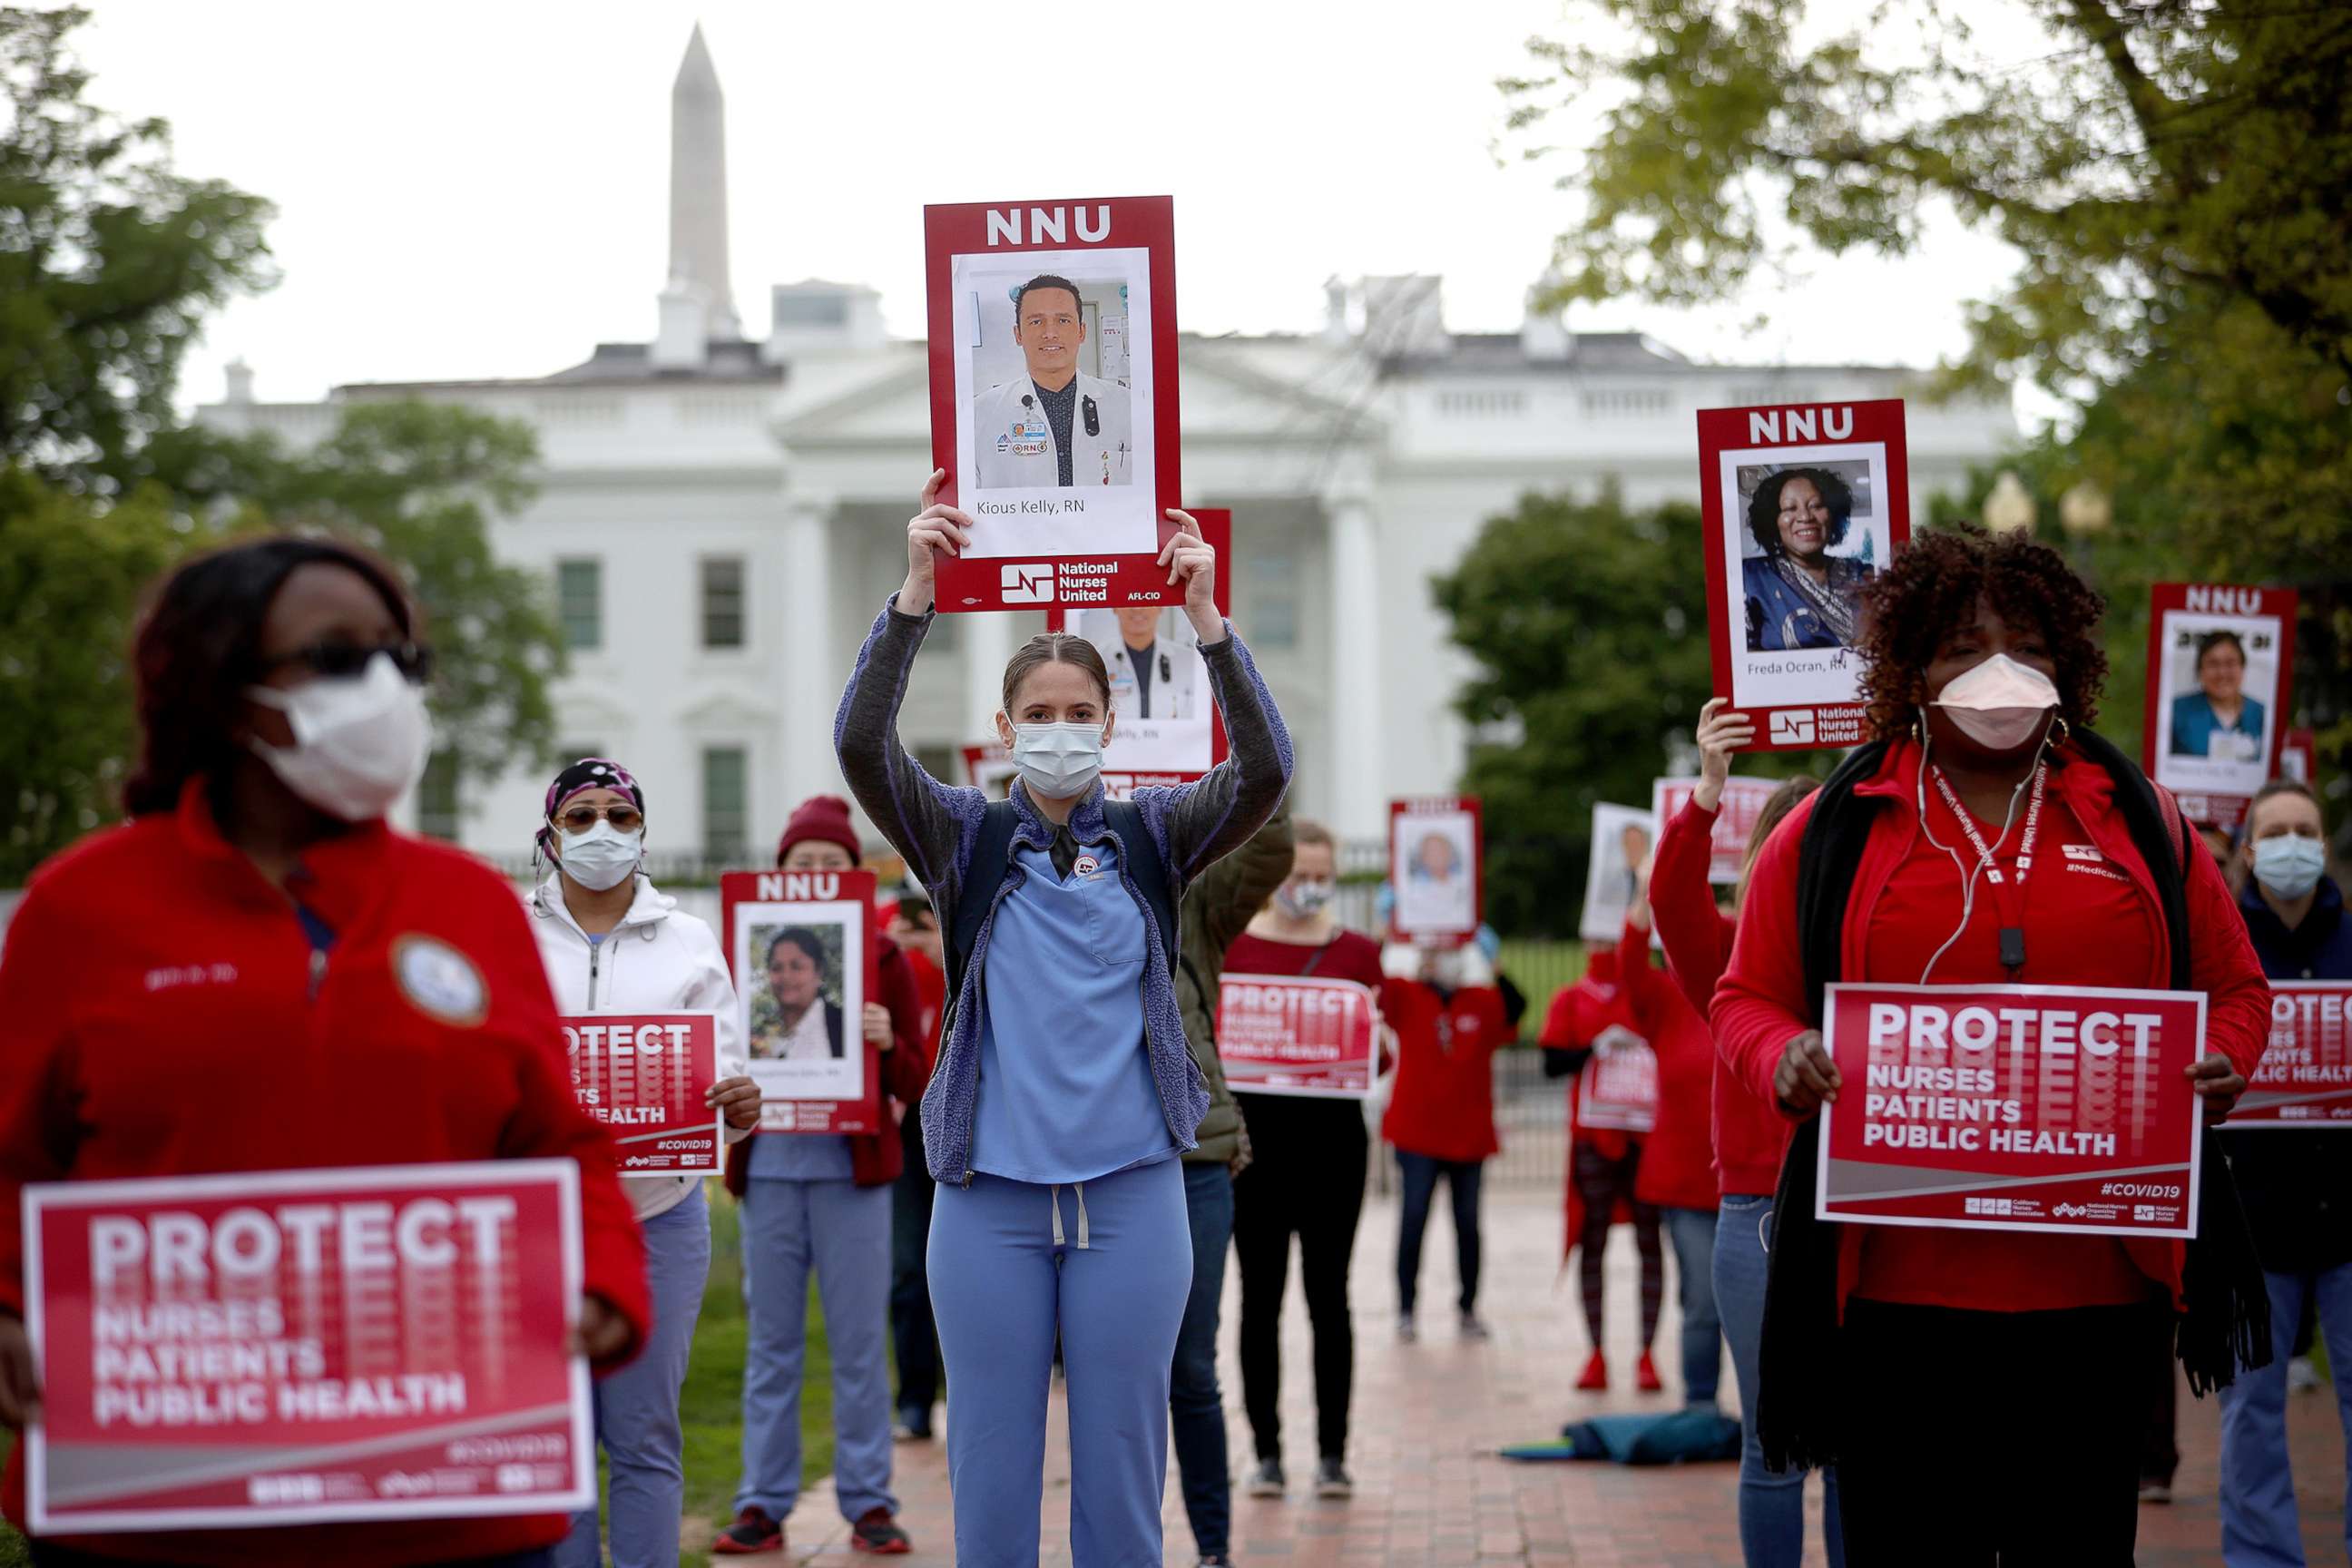 PHOTO: Registered nurses who are members of National Nurses United, the largest nurses union in the United States, protest in front of the White House, April 21, 2020 in Washington, D.C., to draw attention to the lack of personal protective equipment.